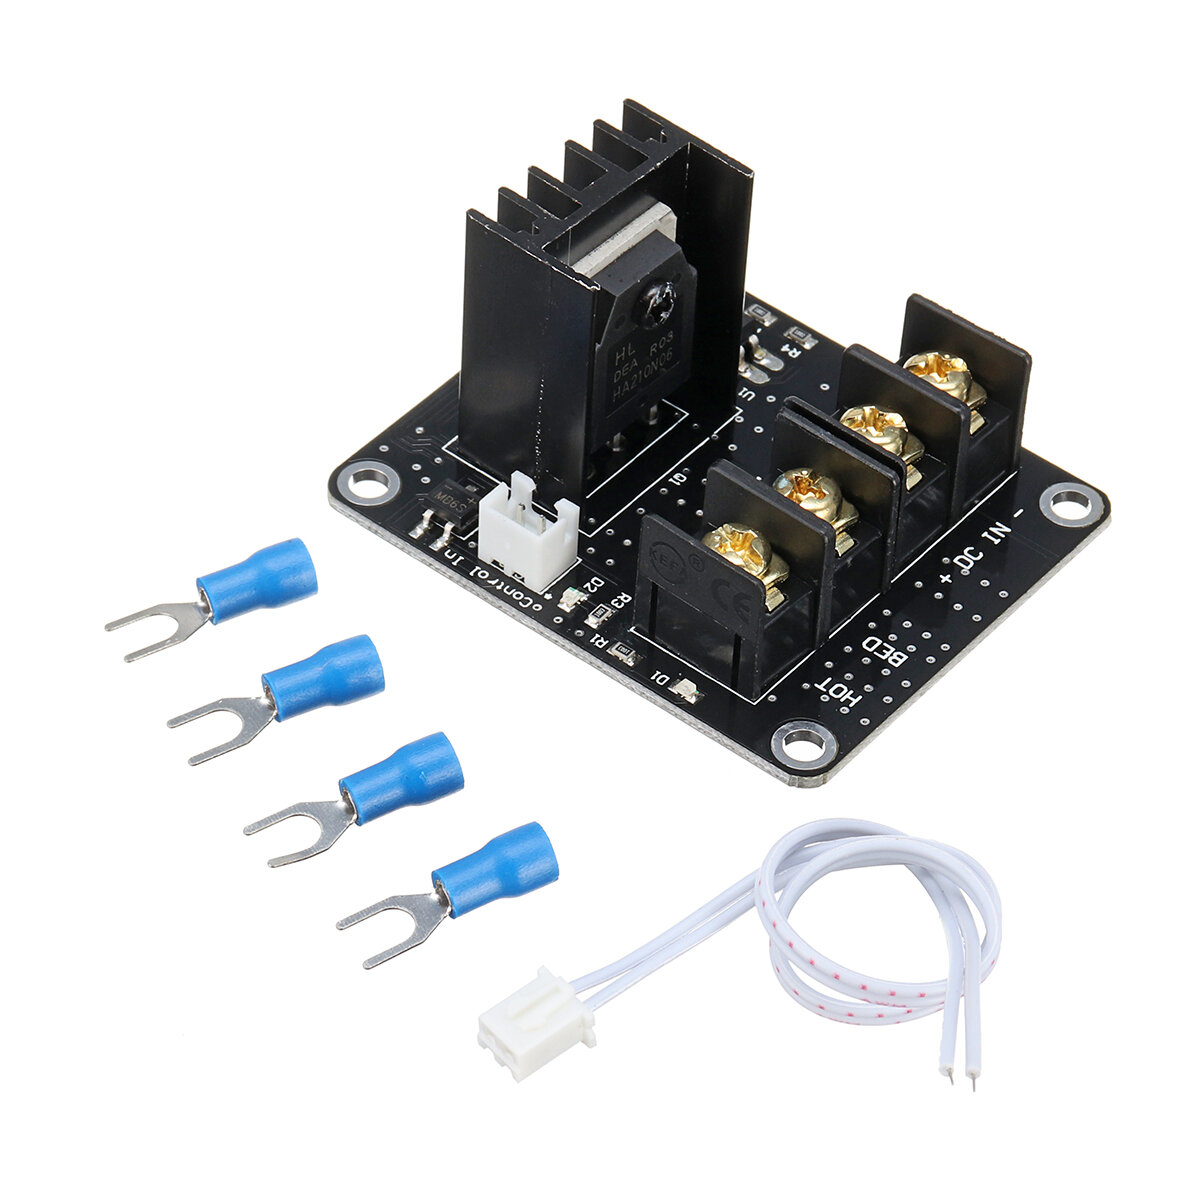 MOSFET High Power Heated Bed Expansion Power Module MOS Tubefor 3D Printer Prusa i3 Anet A8/A6